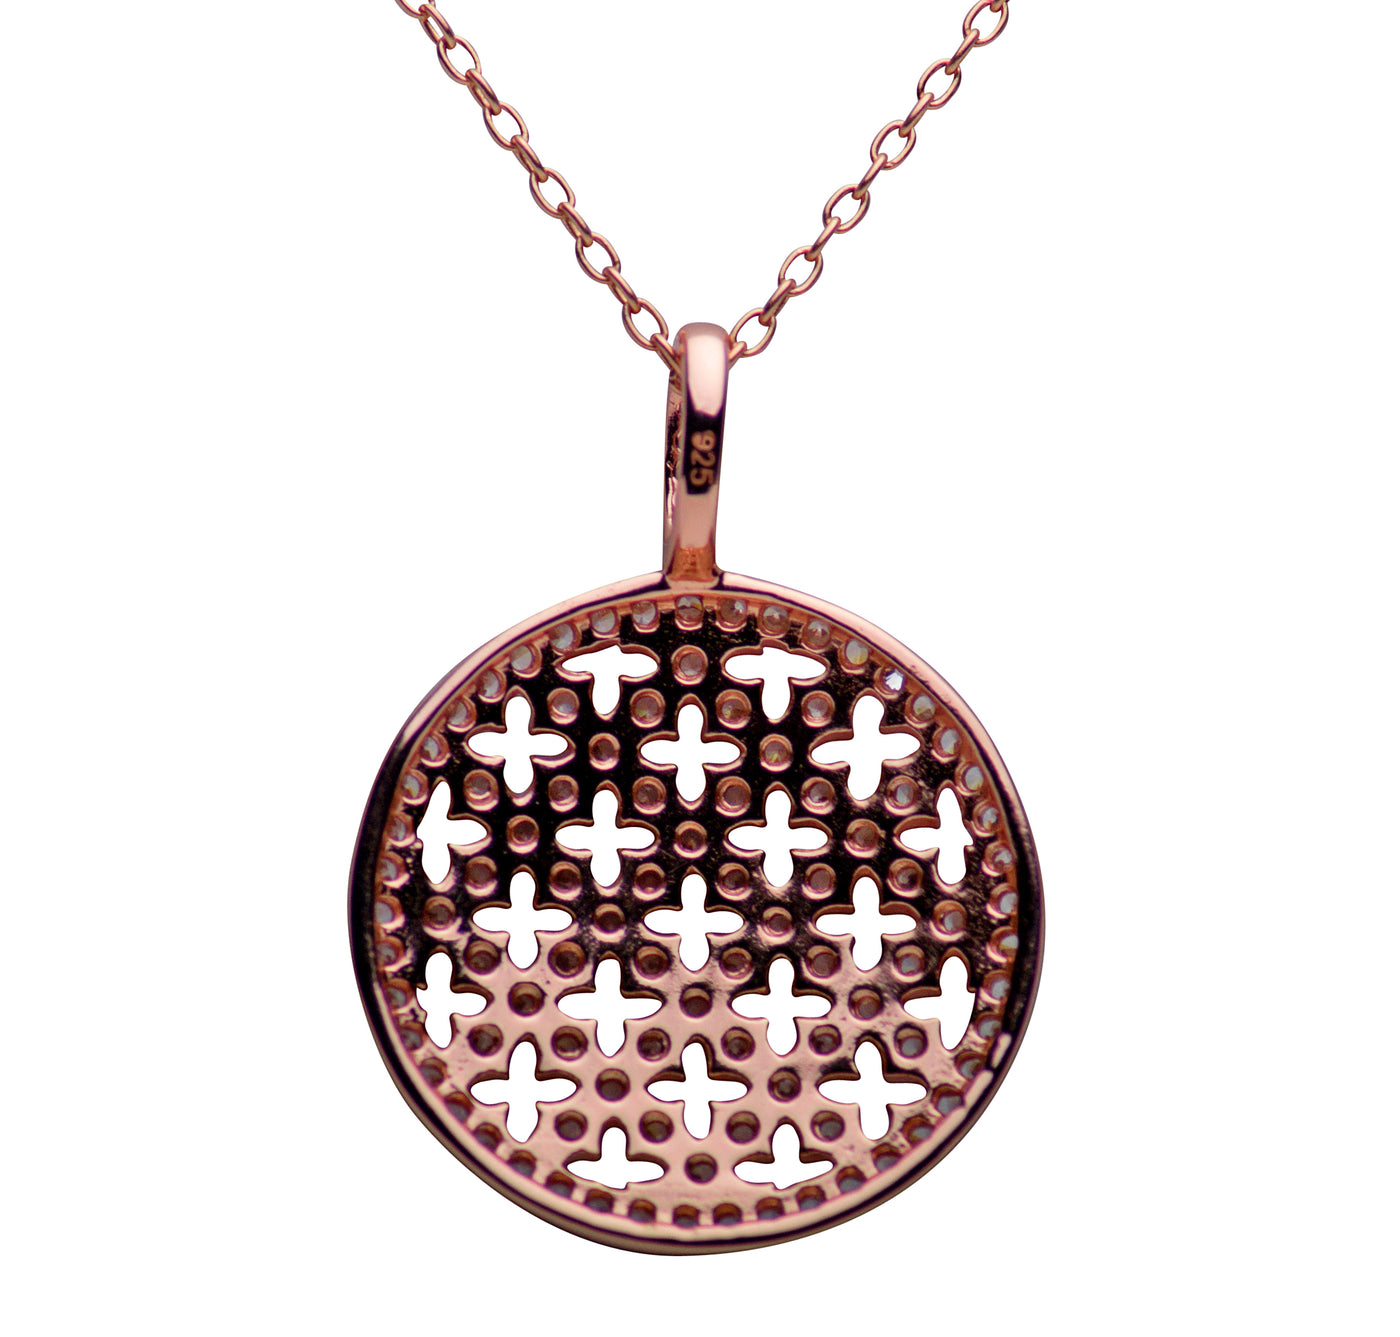 14K Rose Gold Plated Sterling Silver Crisscross Pendant Necklace